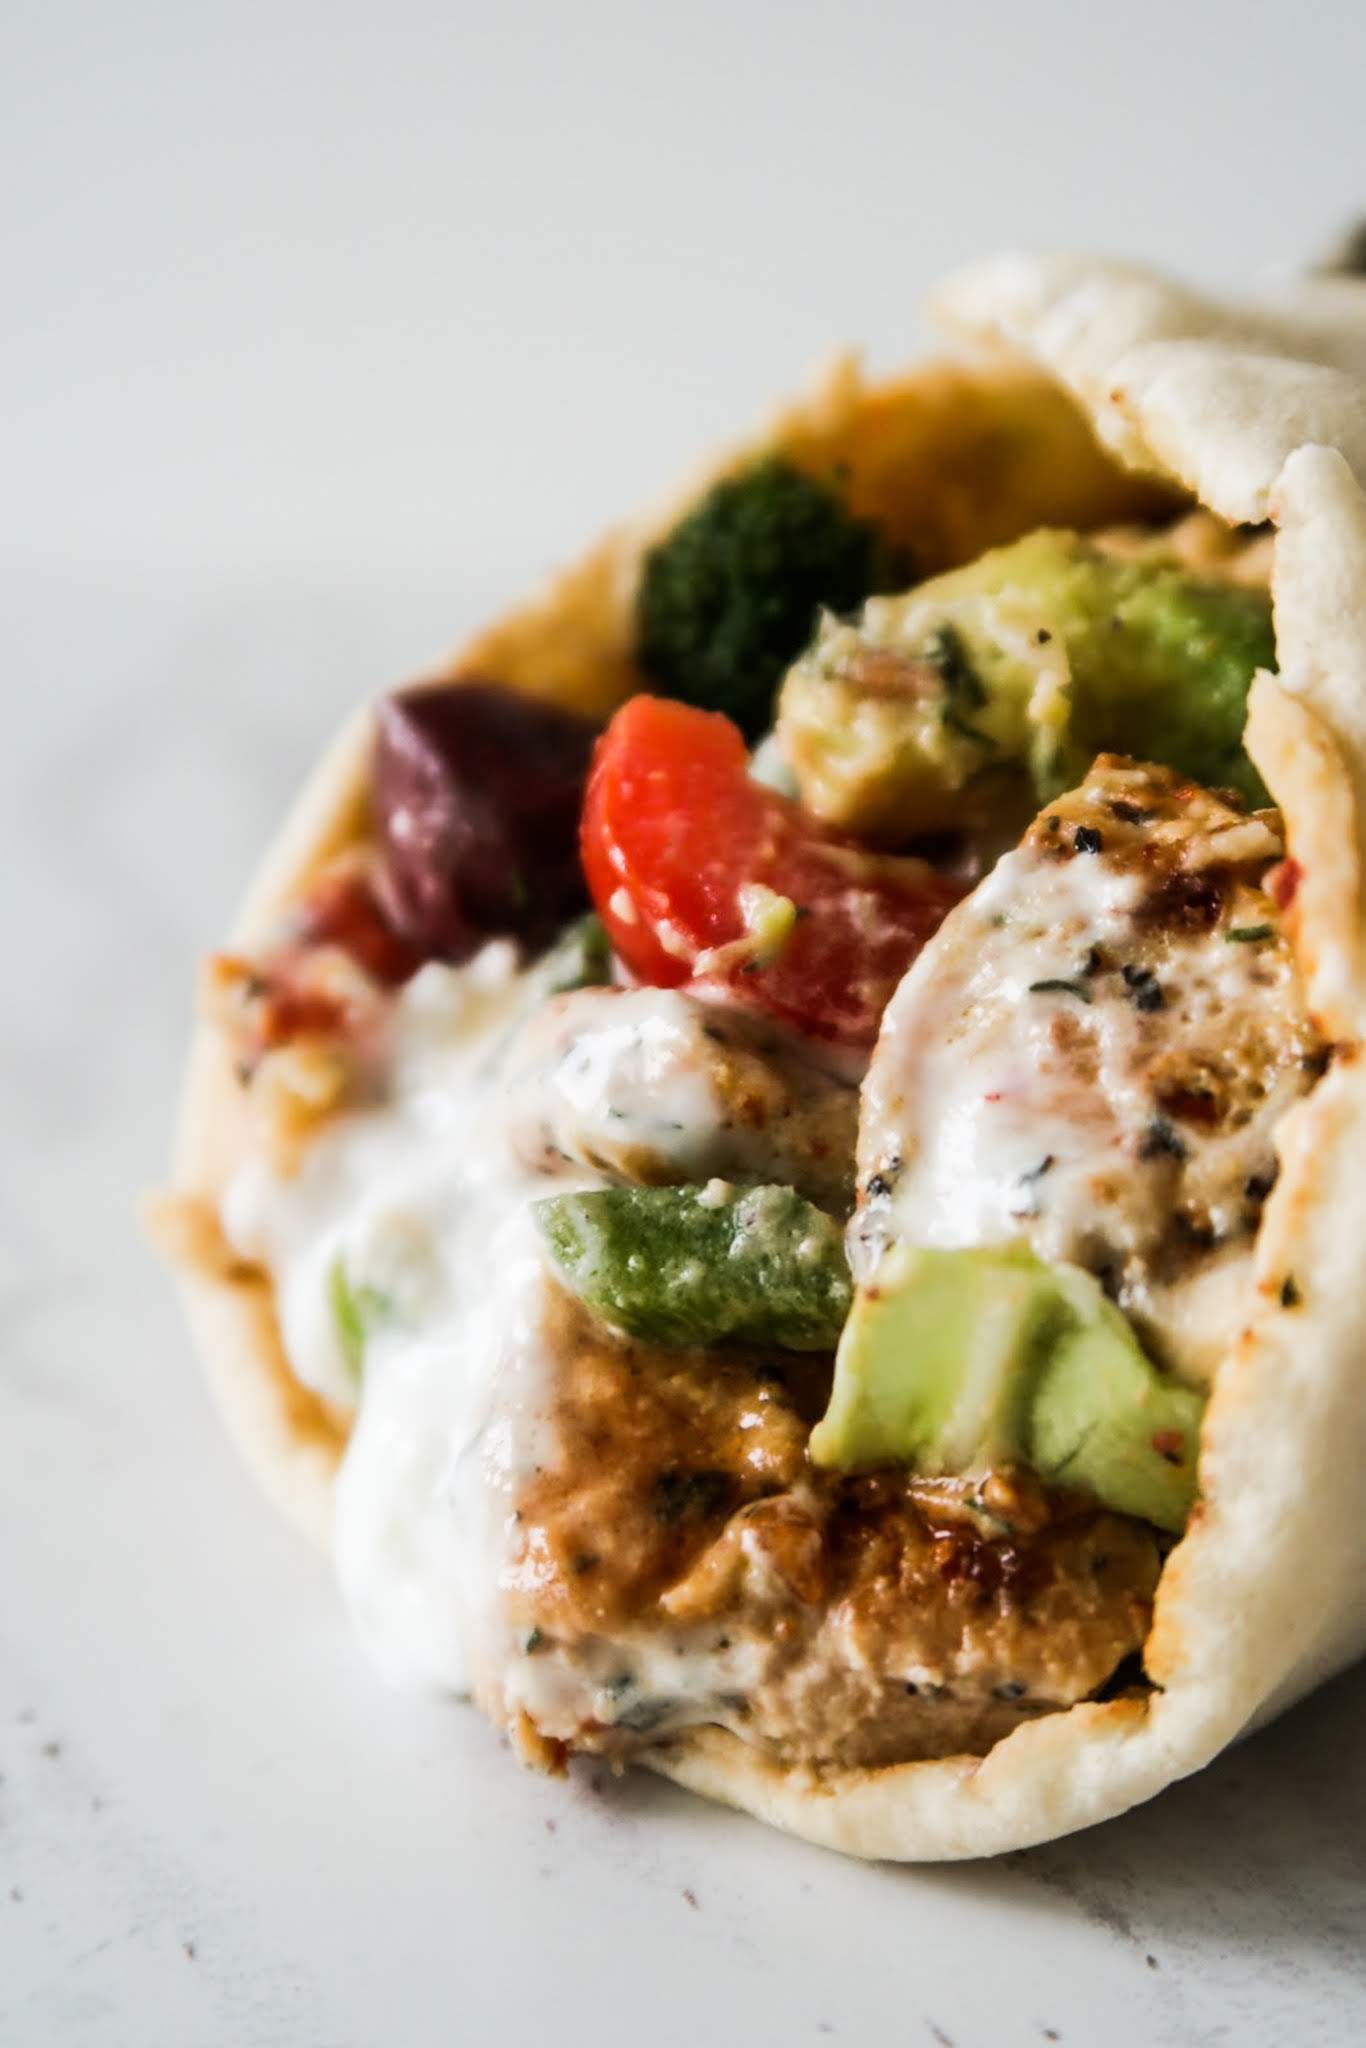 Amazing Mediterranean Chicken Wraps With garlicky yogurt sauce and hummus! These healthy wraps are a delicious healthy dinner recipe that everyone at your dinner table will love! This Mediterranean recipe is quite easy, uses simple ingredients and ready in about 30 minutes when you multi-task!